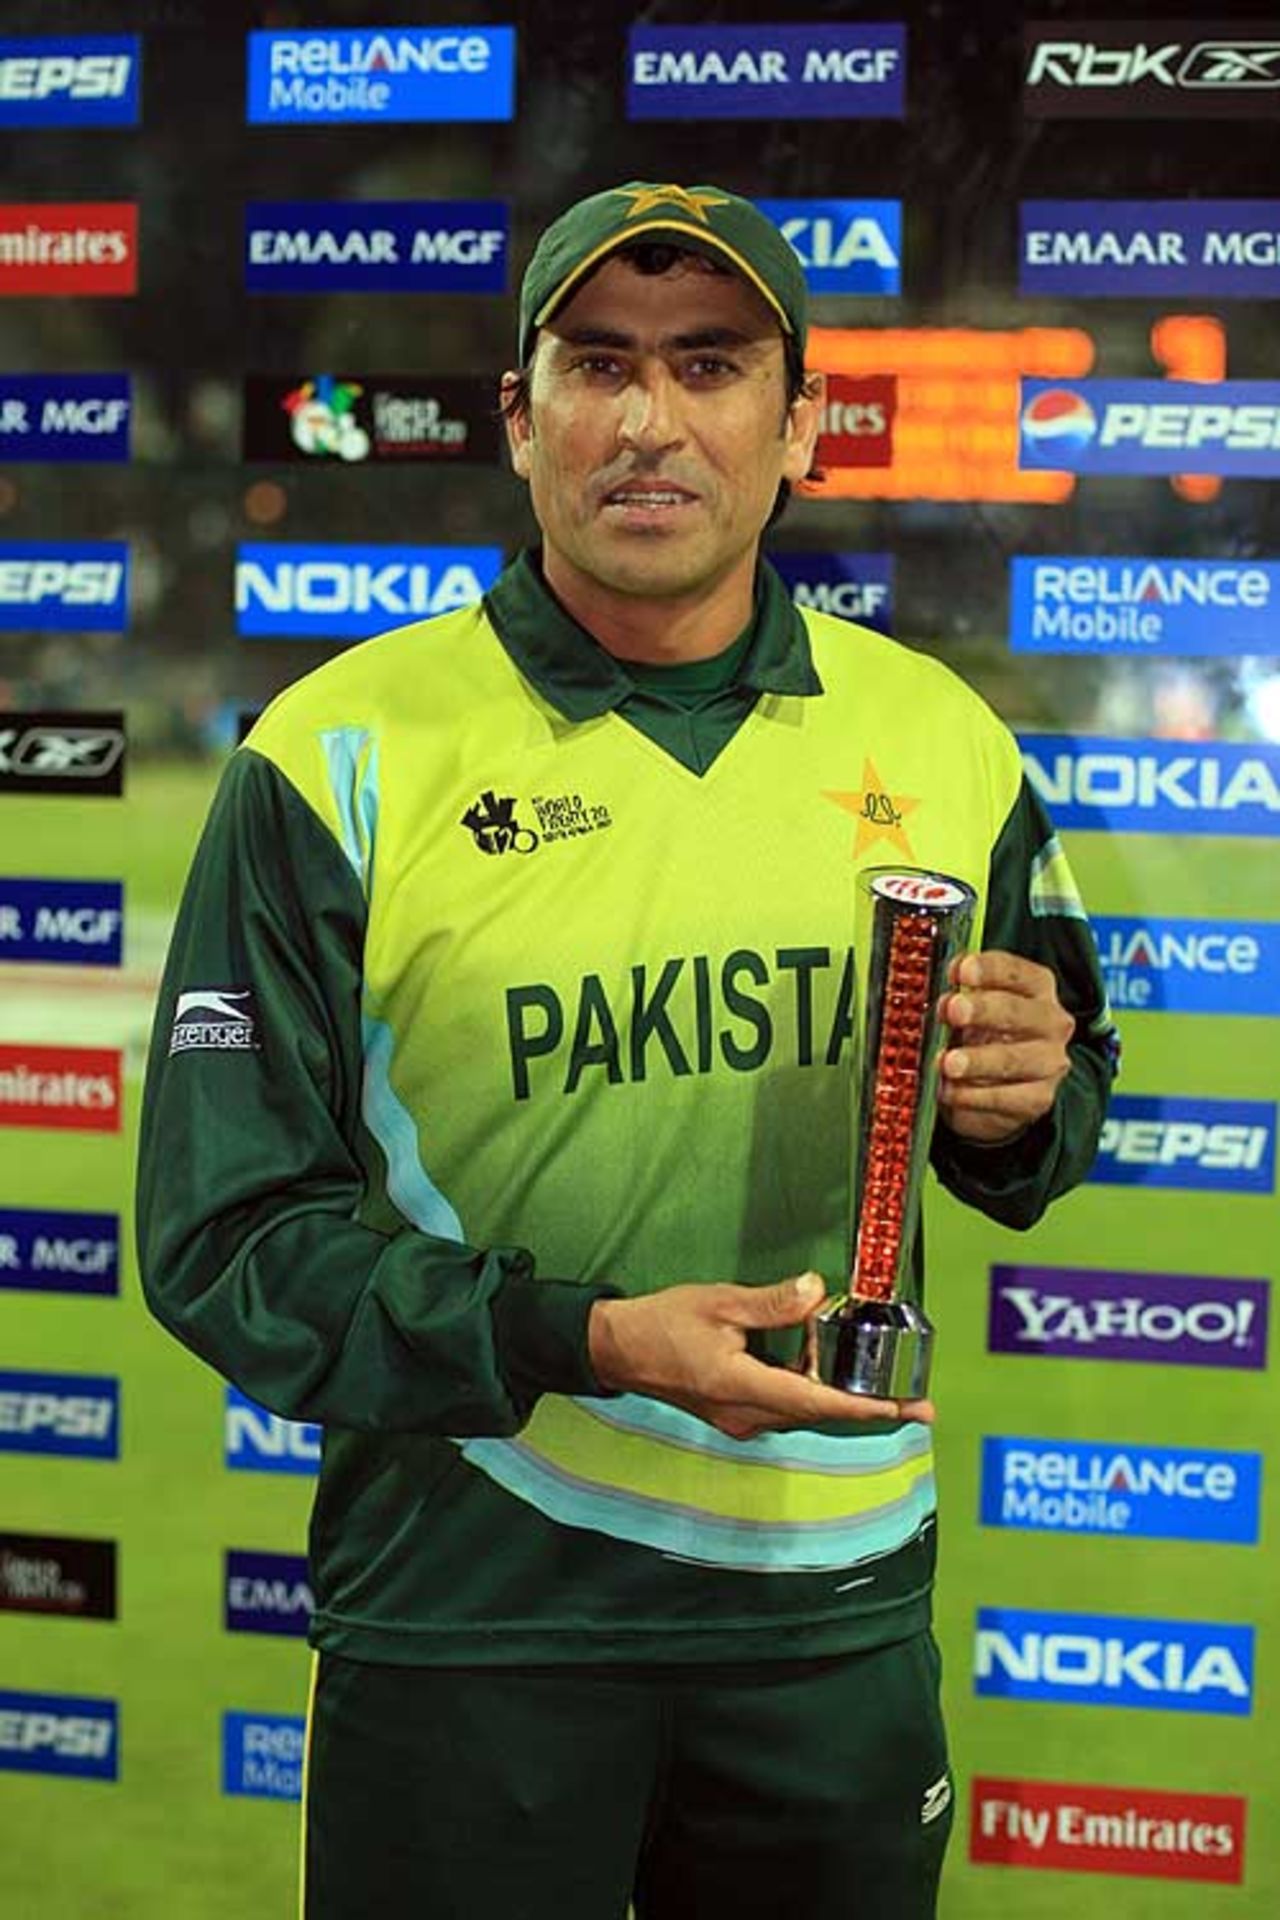 Younis Khan was Man-of-the-Match for his 51 off 35 balls and two catches, Pakistan v Sri Lanka, Group F, ICC World Twenty20, Johannesburg, September 17, 2007